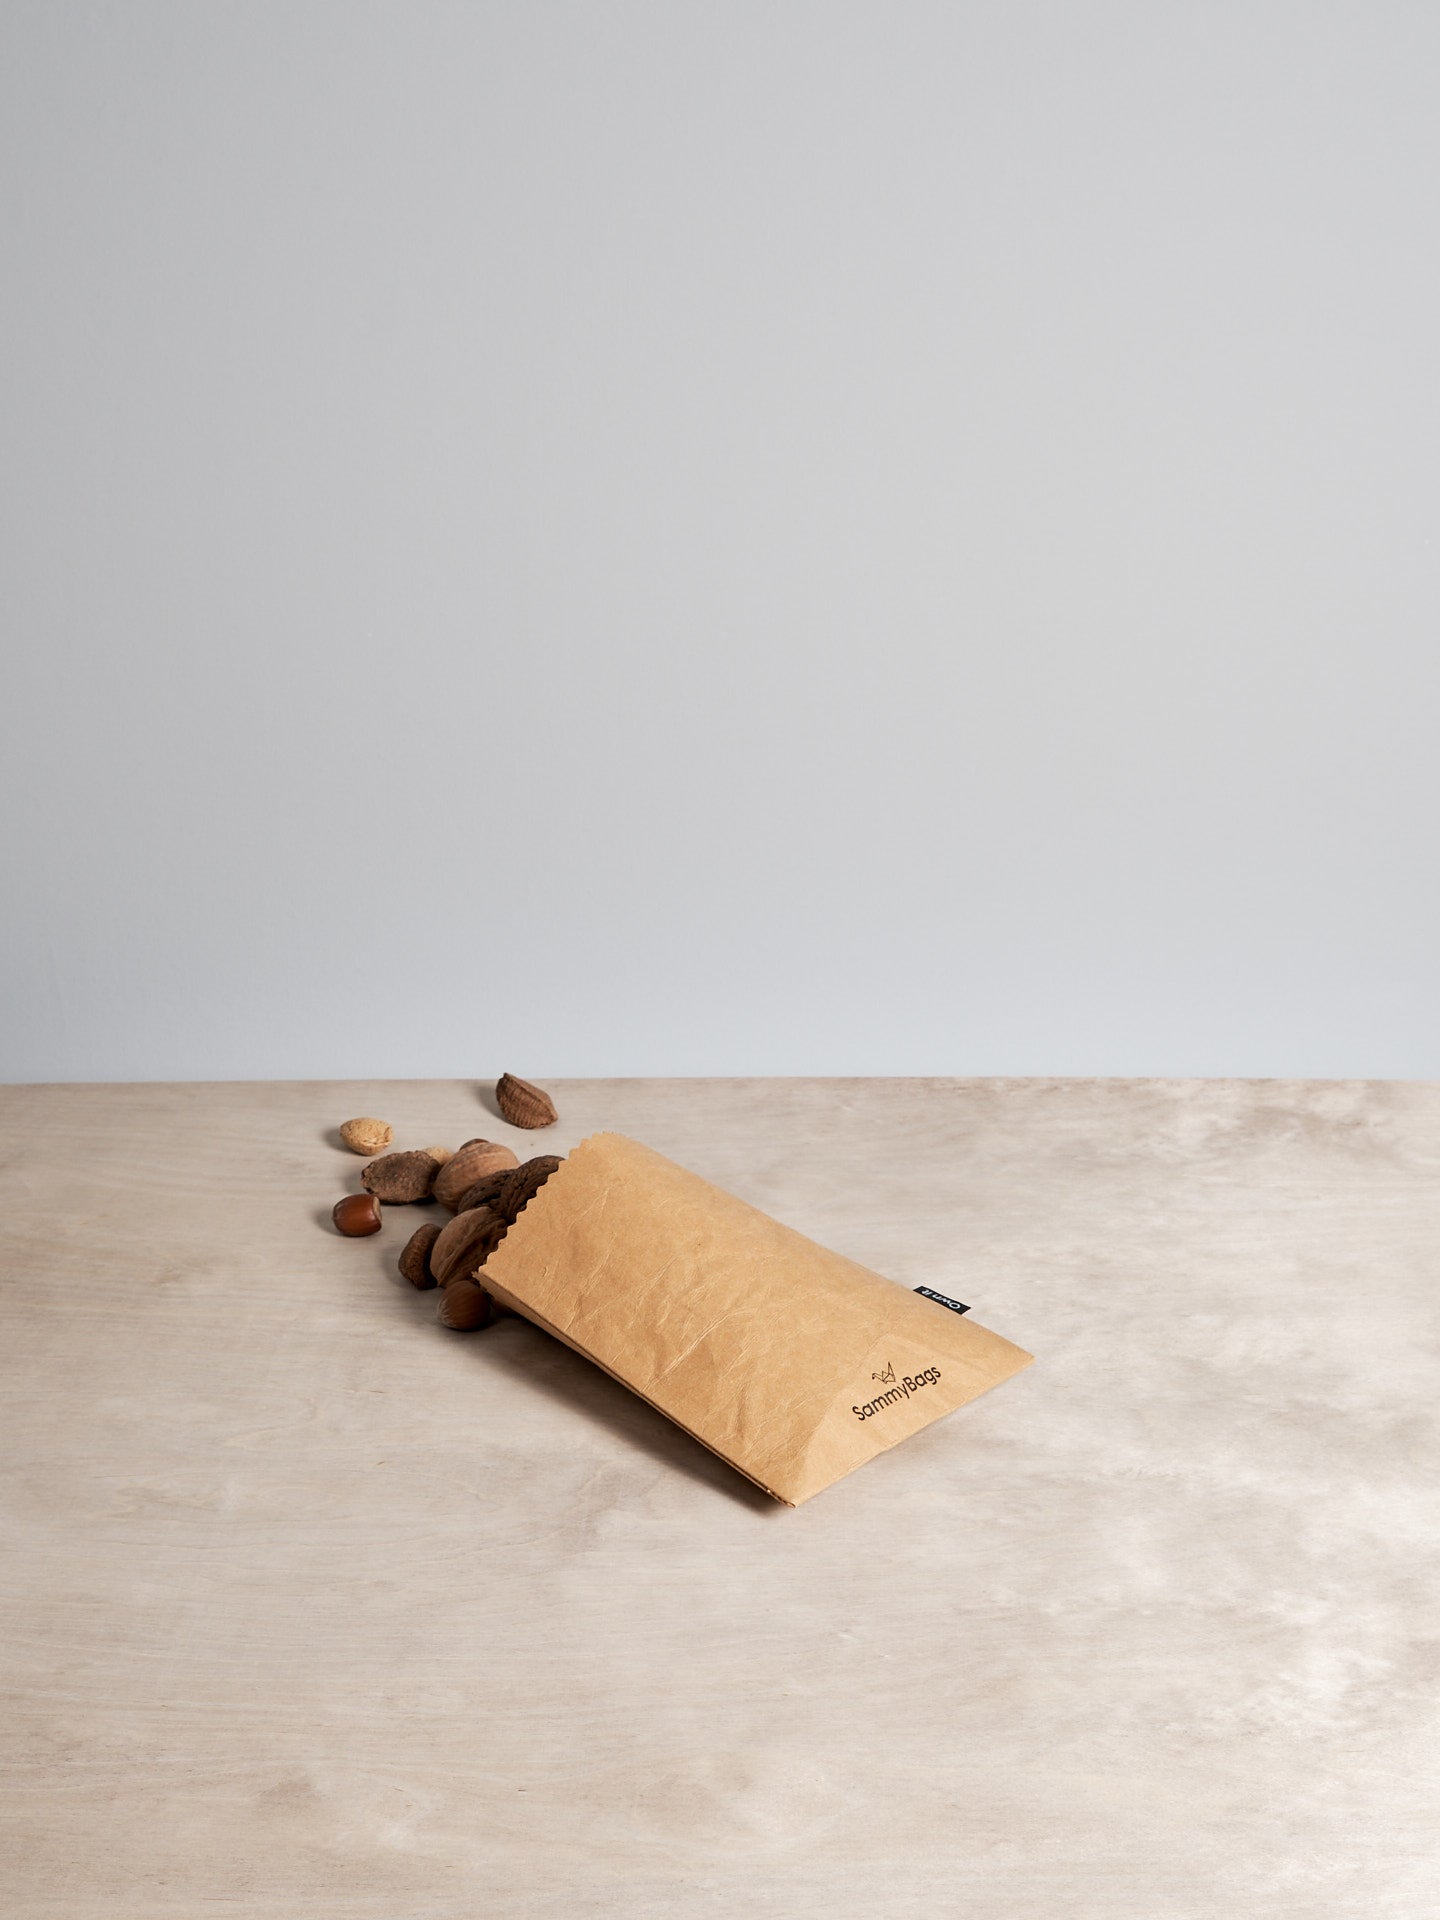 A Sammy Bags Reusable Flat Bag – Small sitting on top of a wooden table.